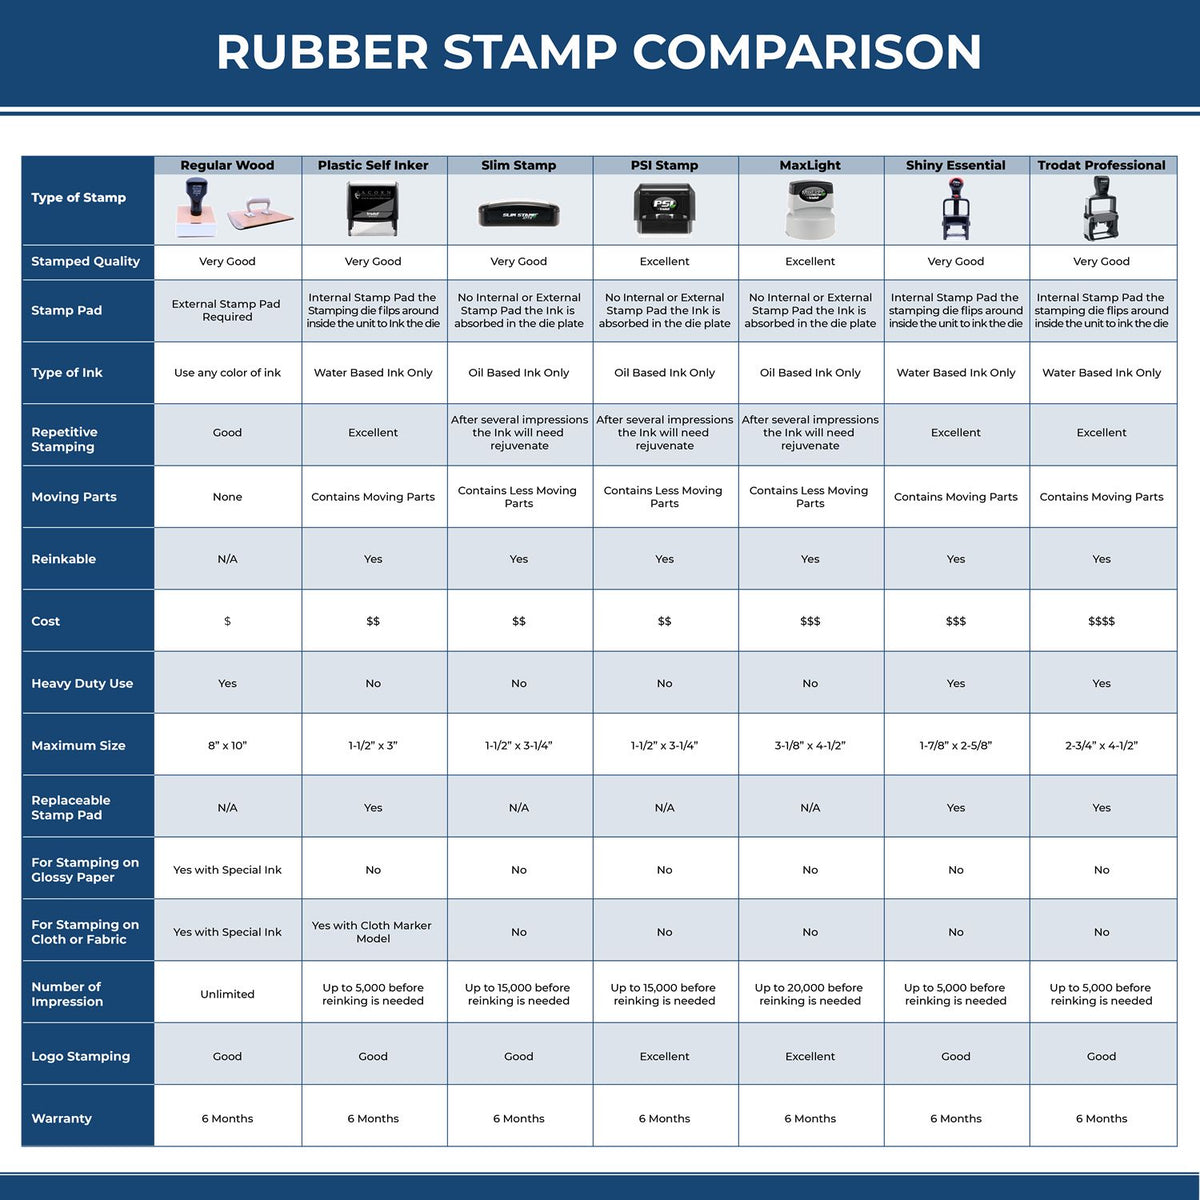 For Deposit Only with Line Rubber Stamp 4824R Rubber Stamp Comparison